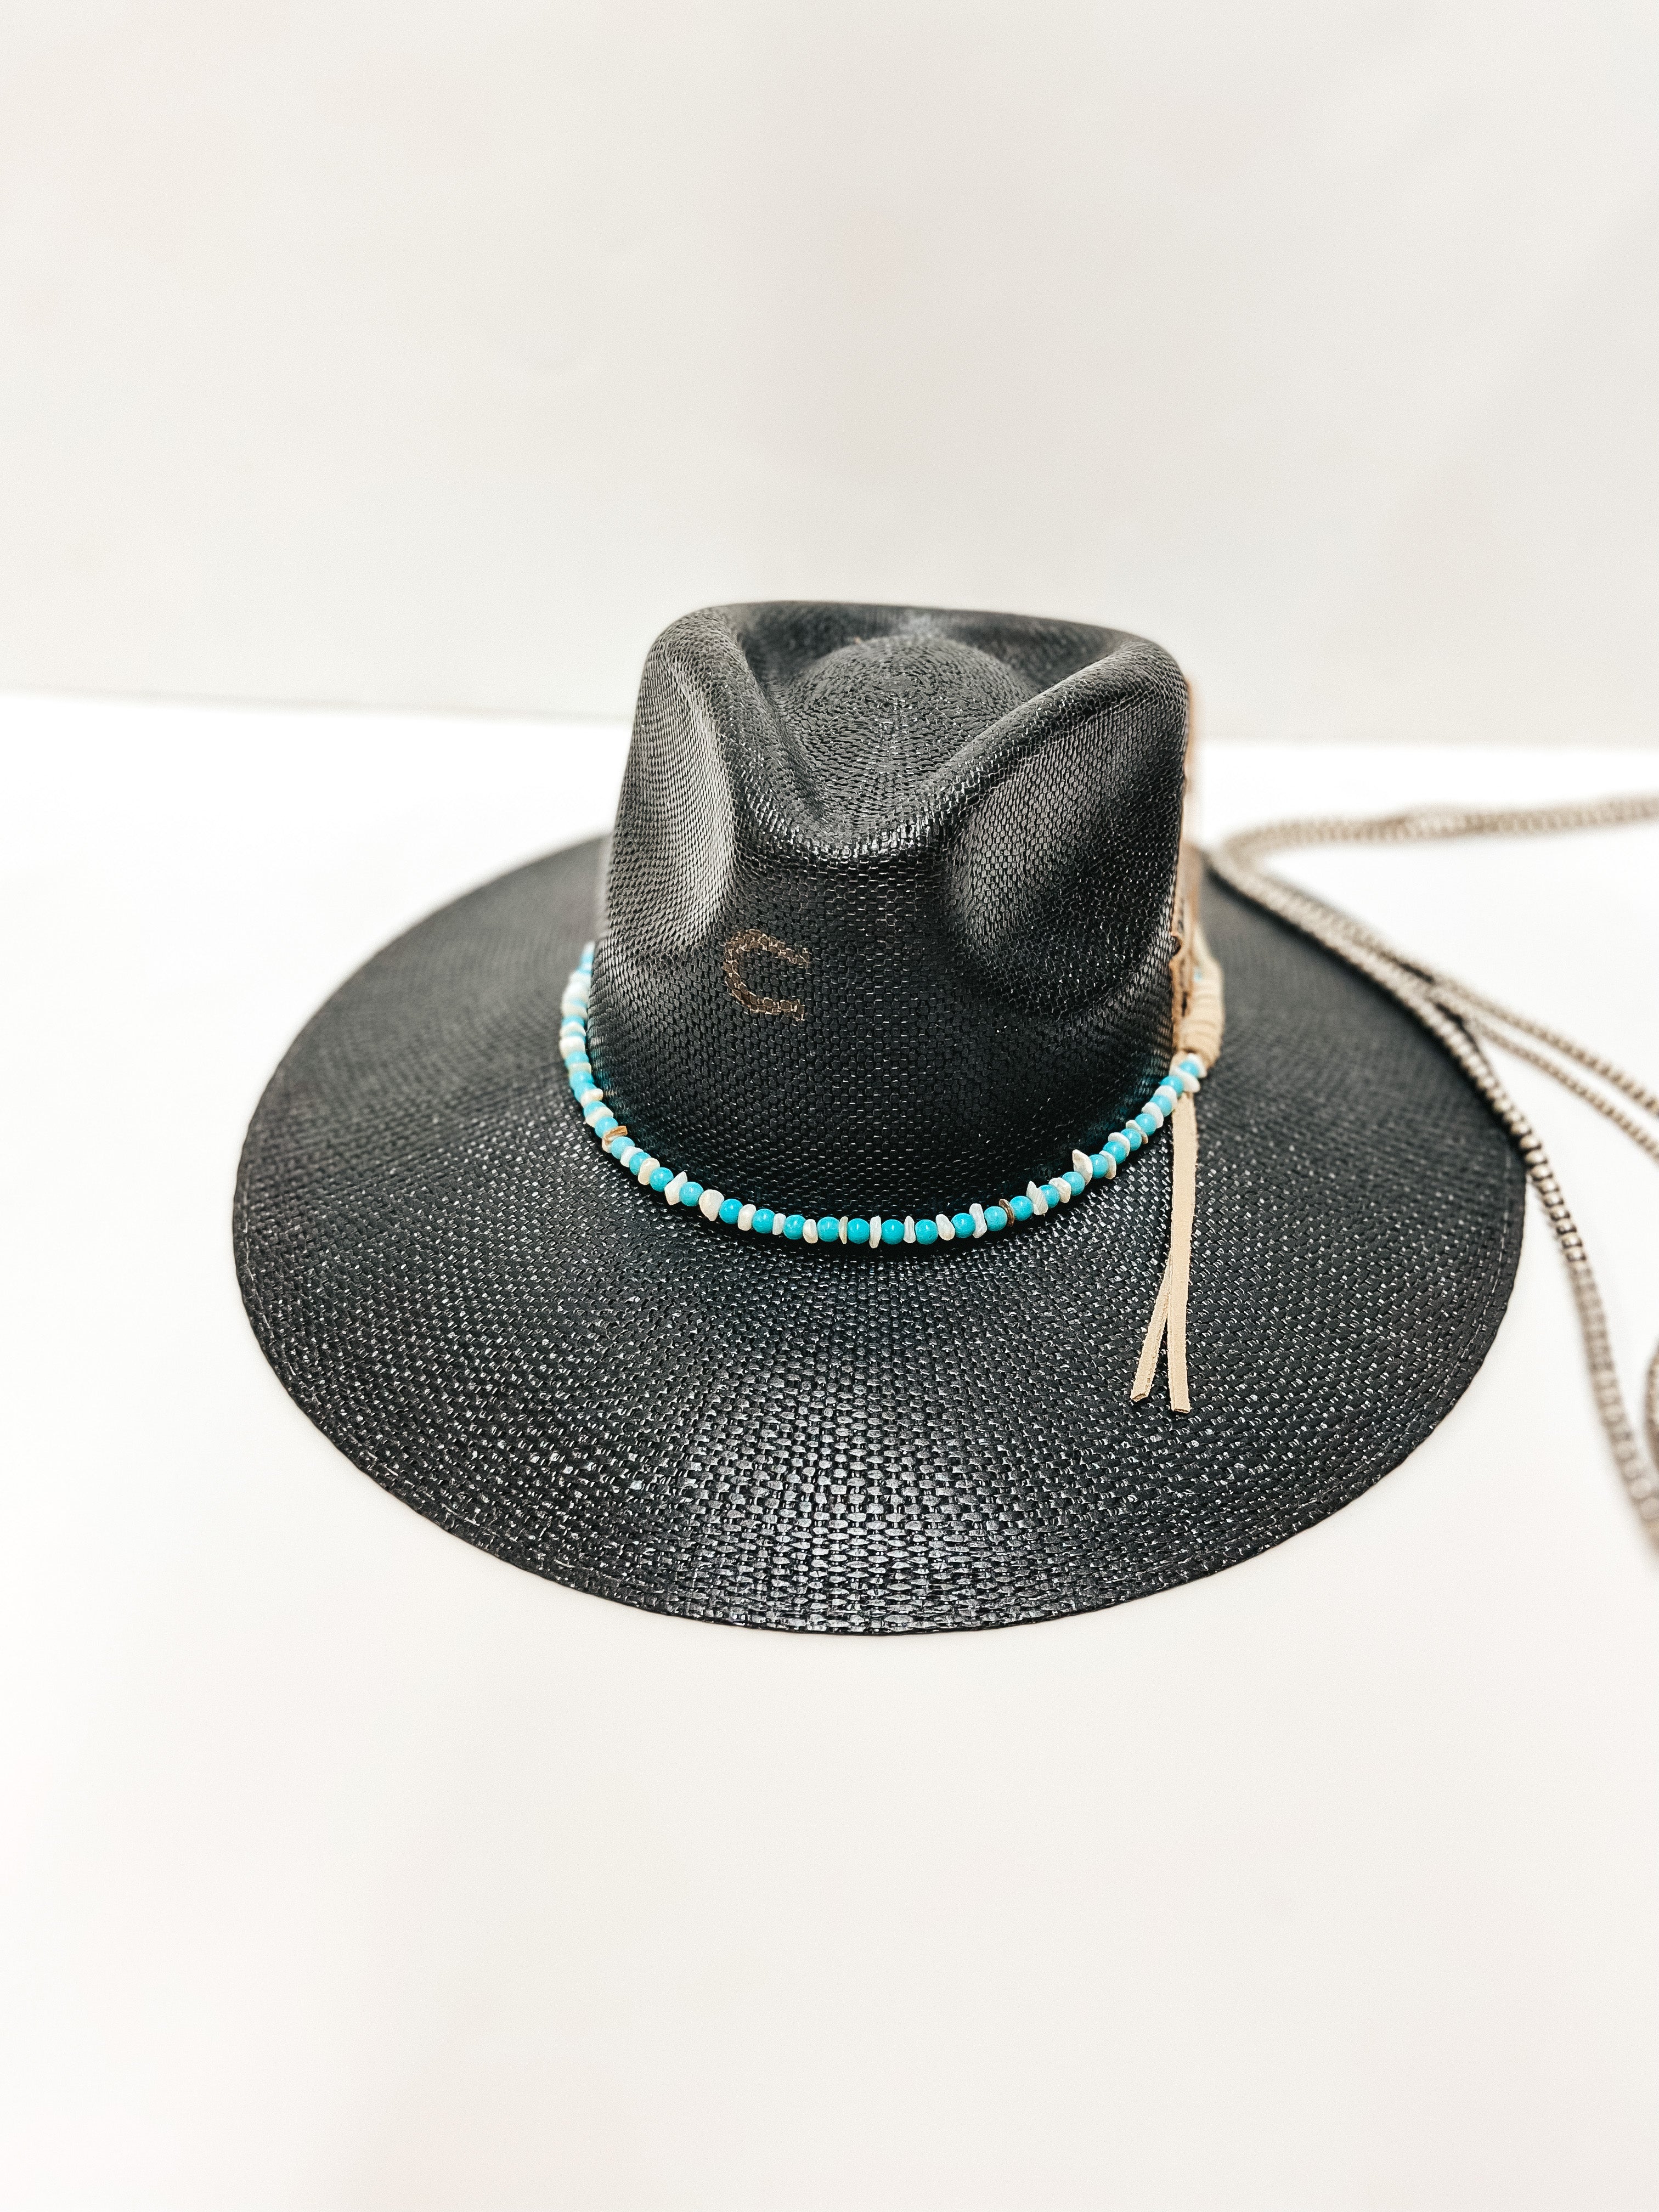 Charlie 1 Horse | Midnight Toker Straw Stiff Brim Hat with Embroidered Feather and Beaded Band in Black - Giddy Up Glamour Boutique